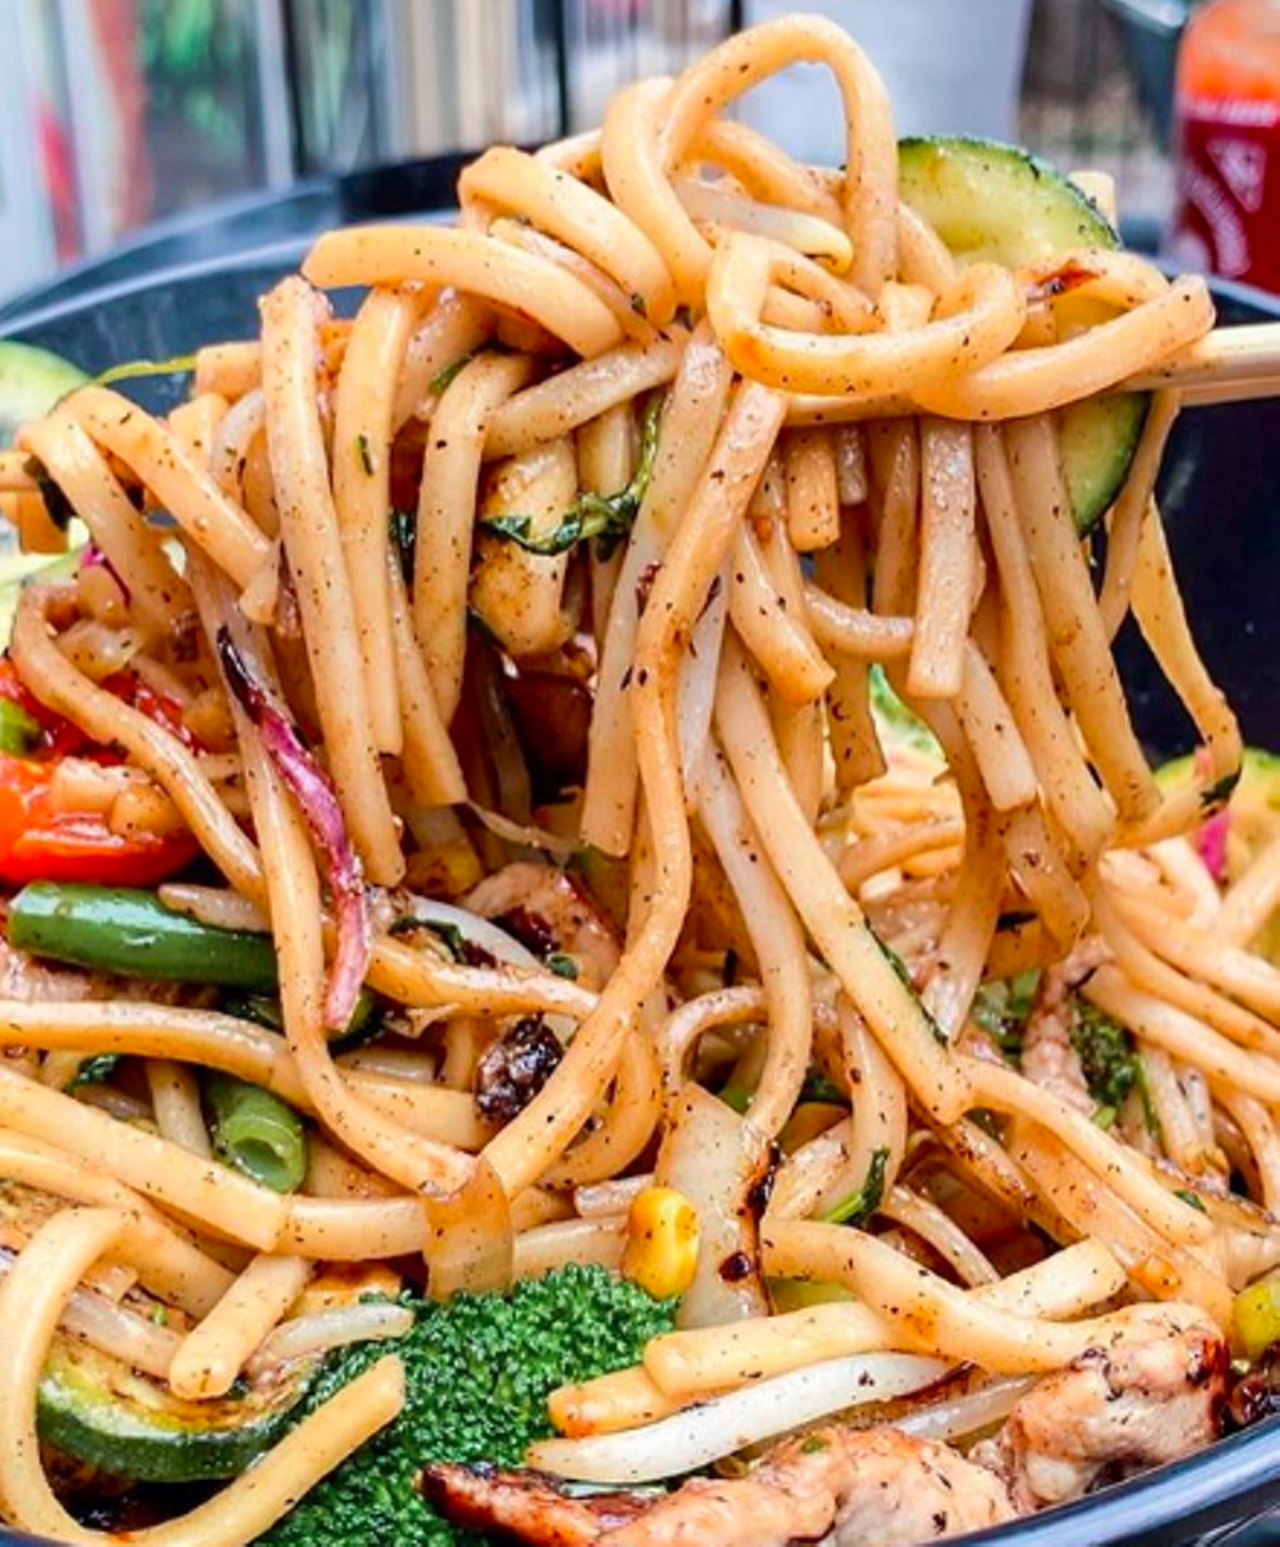 Genghis Grill
Multiple locations, genghisgrill.com
If your kids are into noodles, you’re in luck. With the purchase of an adult entree, you can get a free kid’s meal for your rugrats 12 and under on Tuesdays.
Photo via Instagram / stine.eats